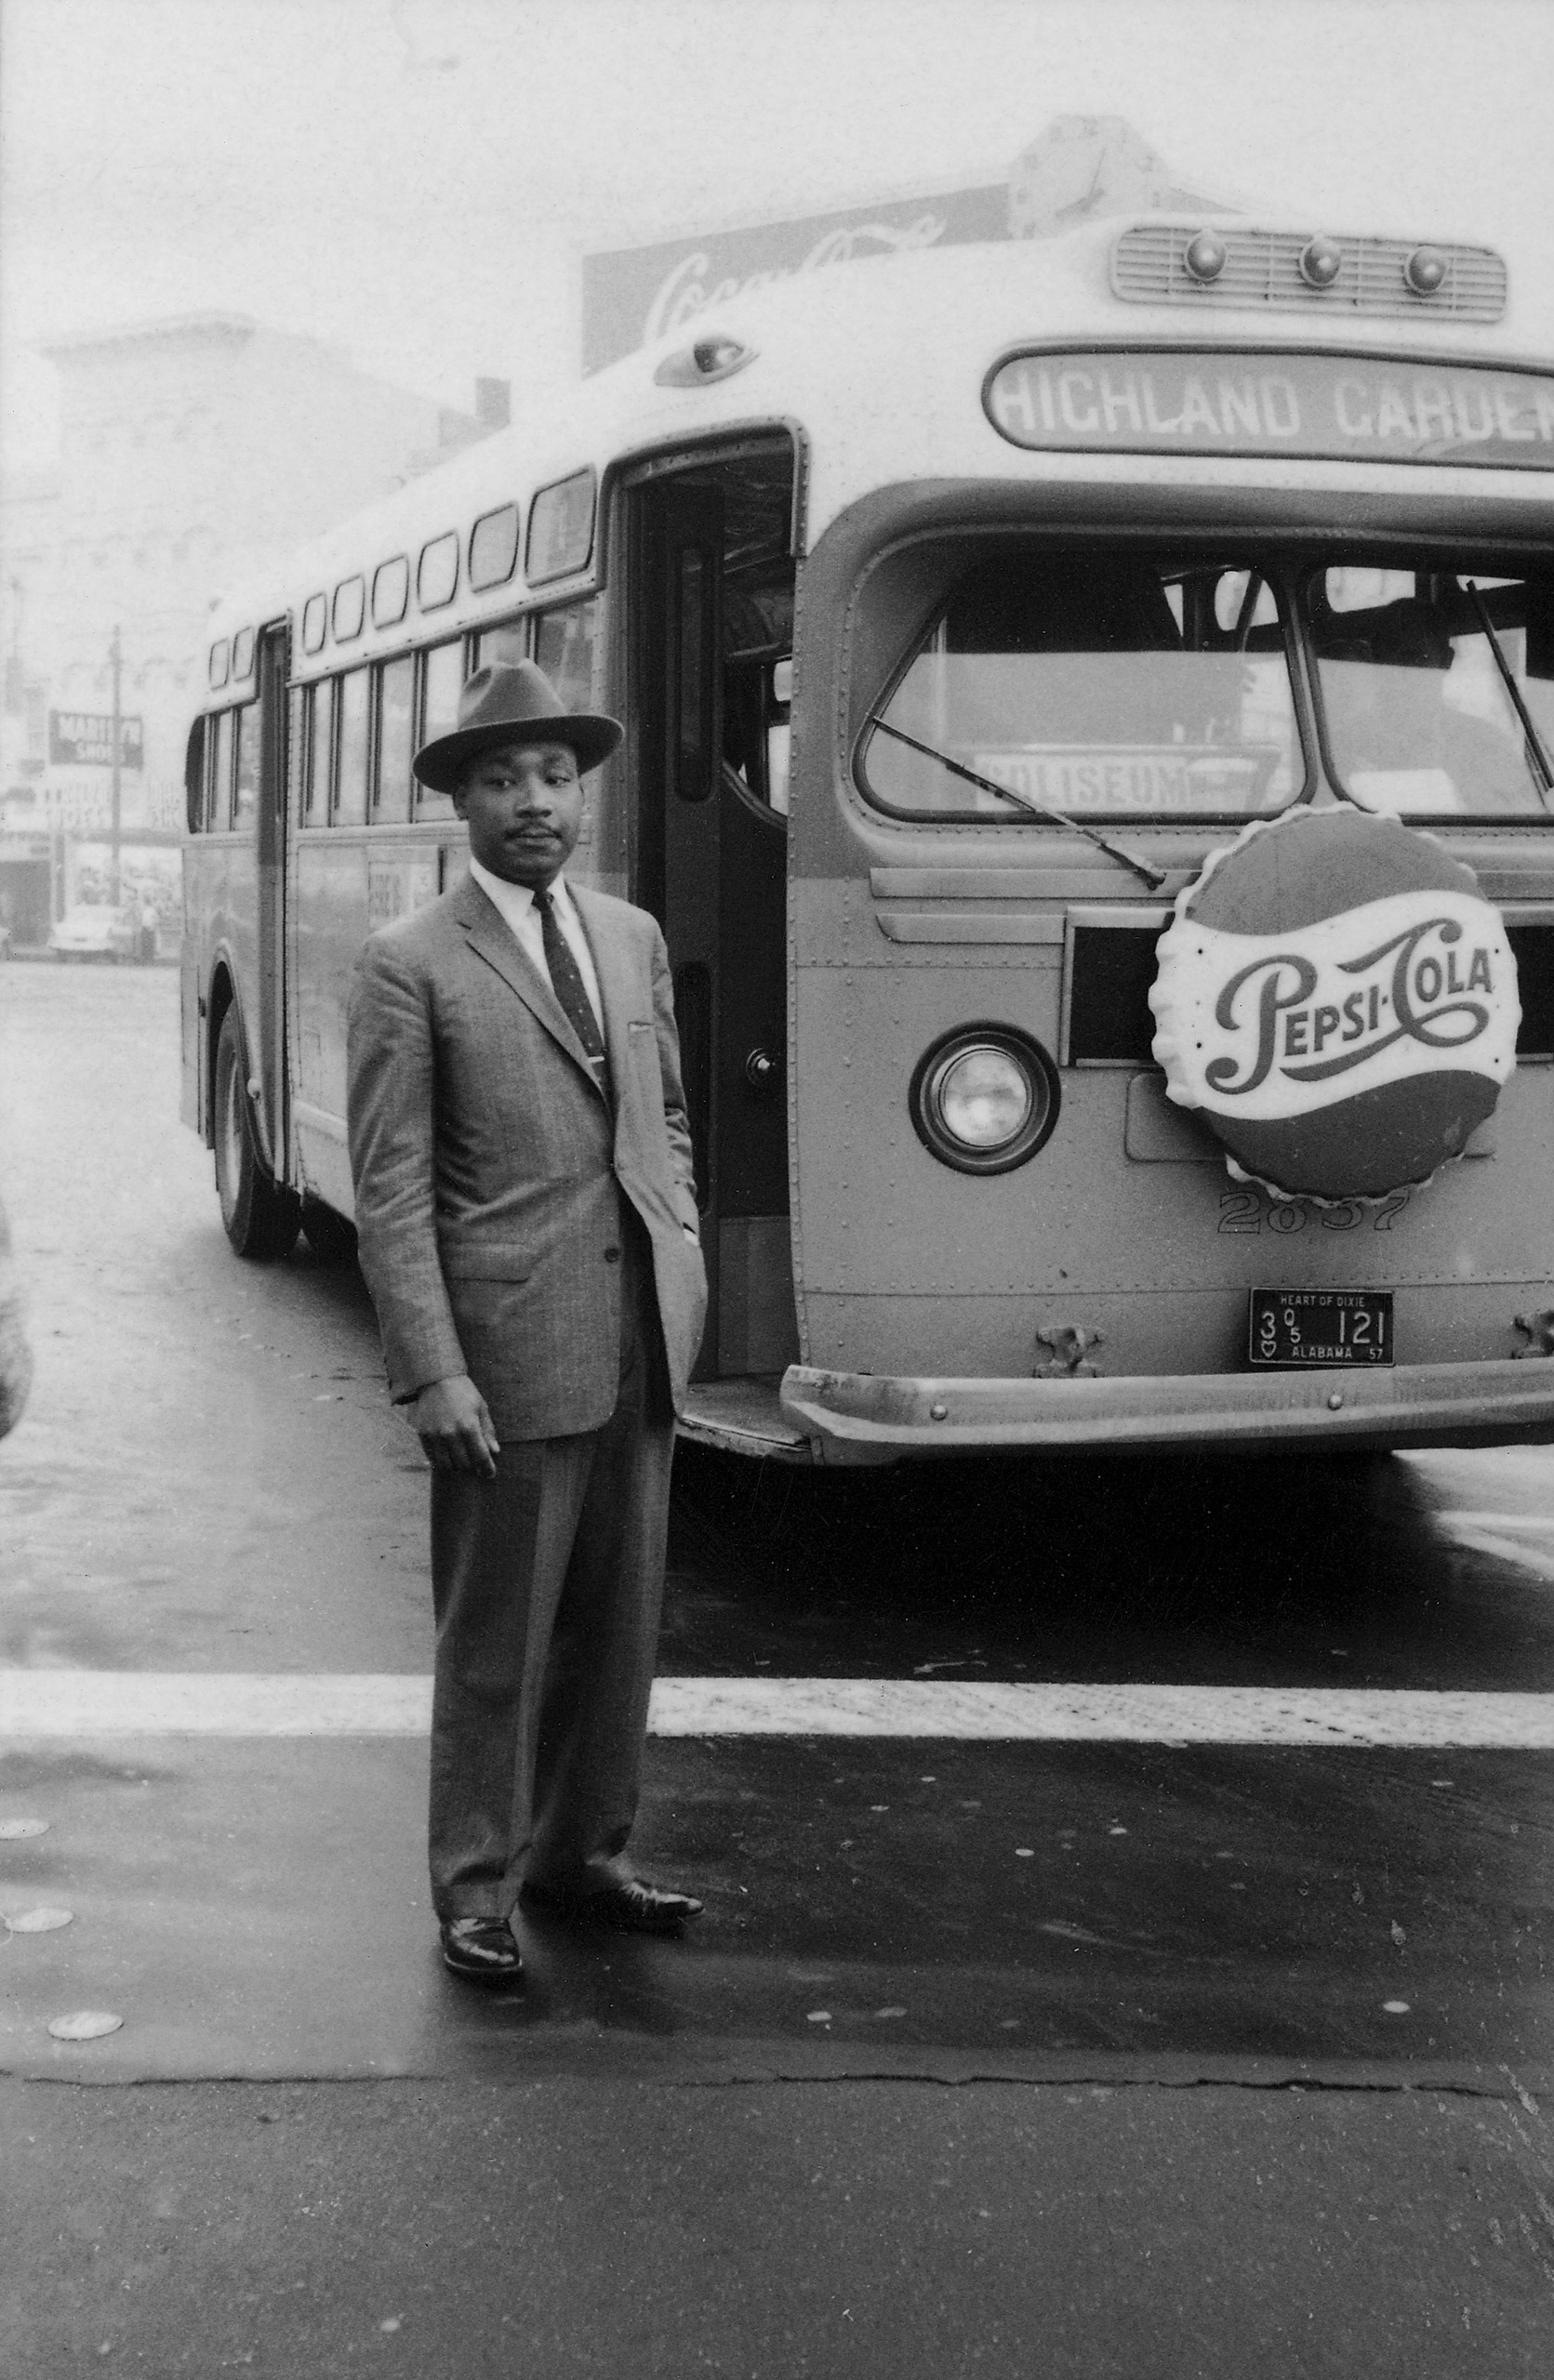 American Civil Rights leader Reverend Martin Luther King Jr. stands in front of a bus at the end of the Montgomery bus boycott, Montgomery, Alabama, December 26, 1956.